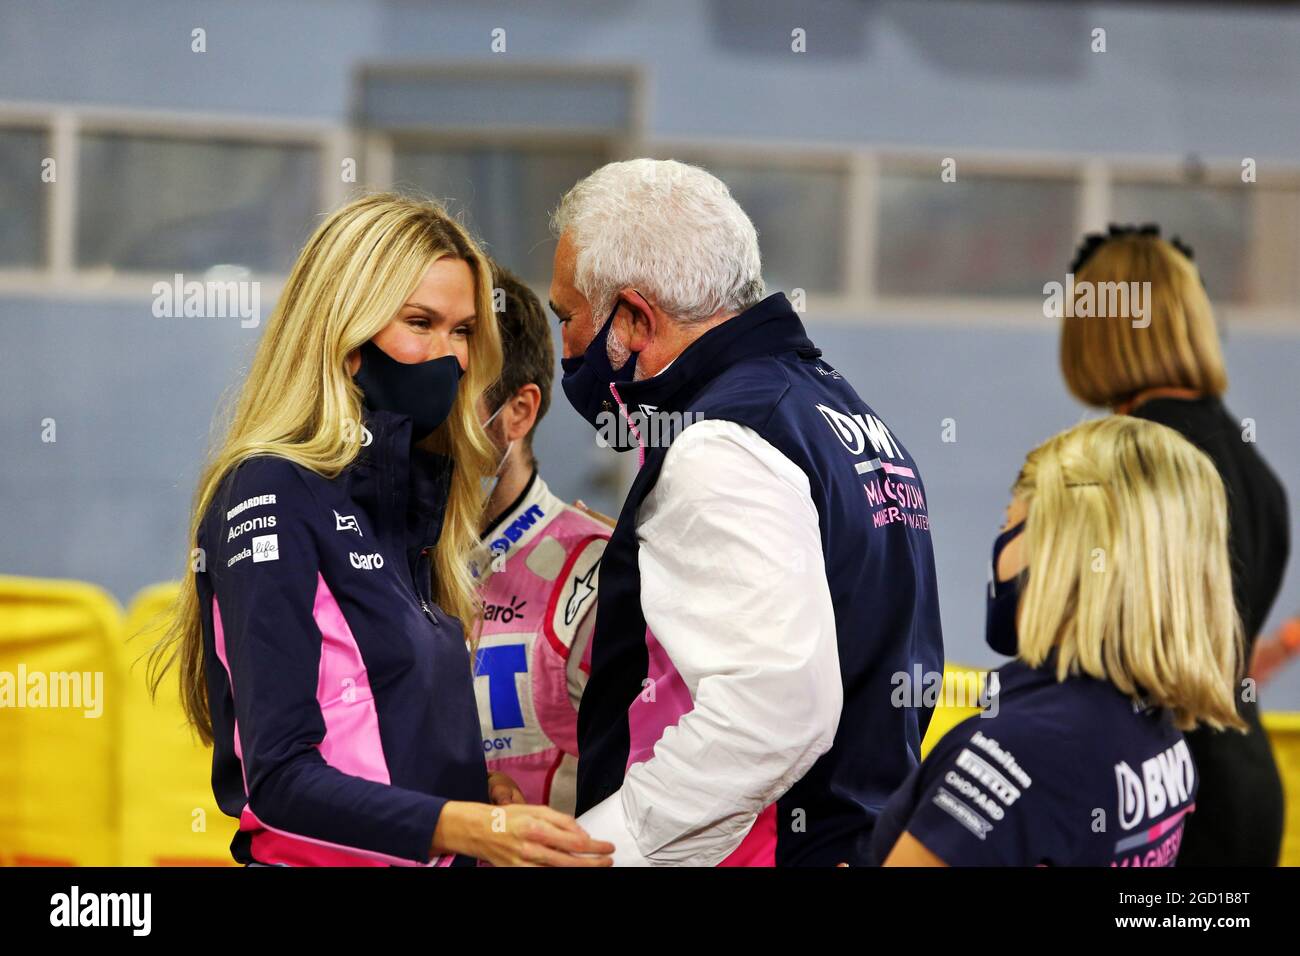 Claire-Anne Stroll celebrates victory for the team with husband Lawrence Stroll (CDN) Racing Point F1 Team Investor. Sakhir Grand Prix, Sunday 6th December 2020. Sakhir, Bahrain. Stock Photo